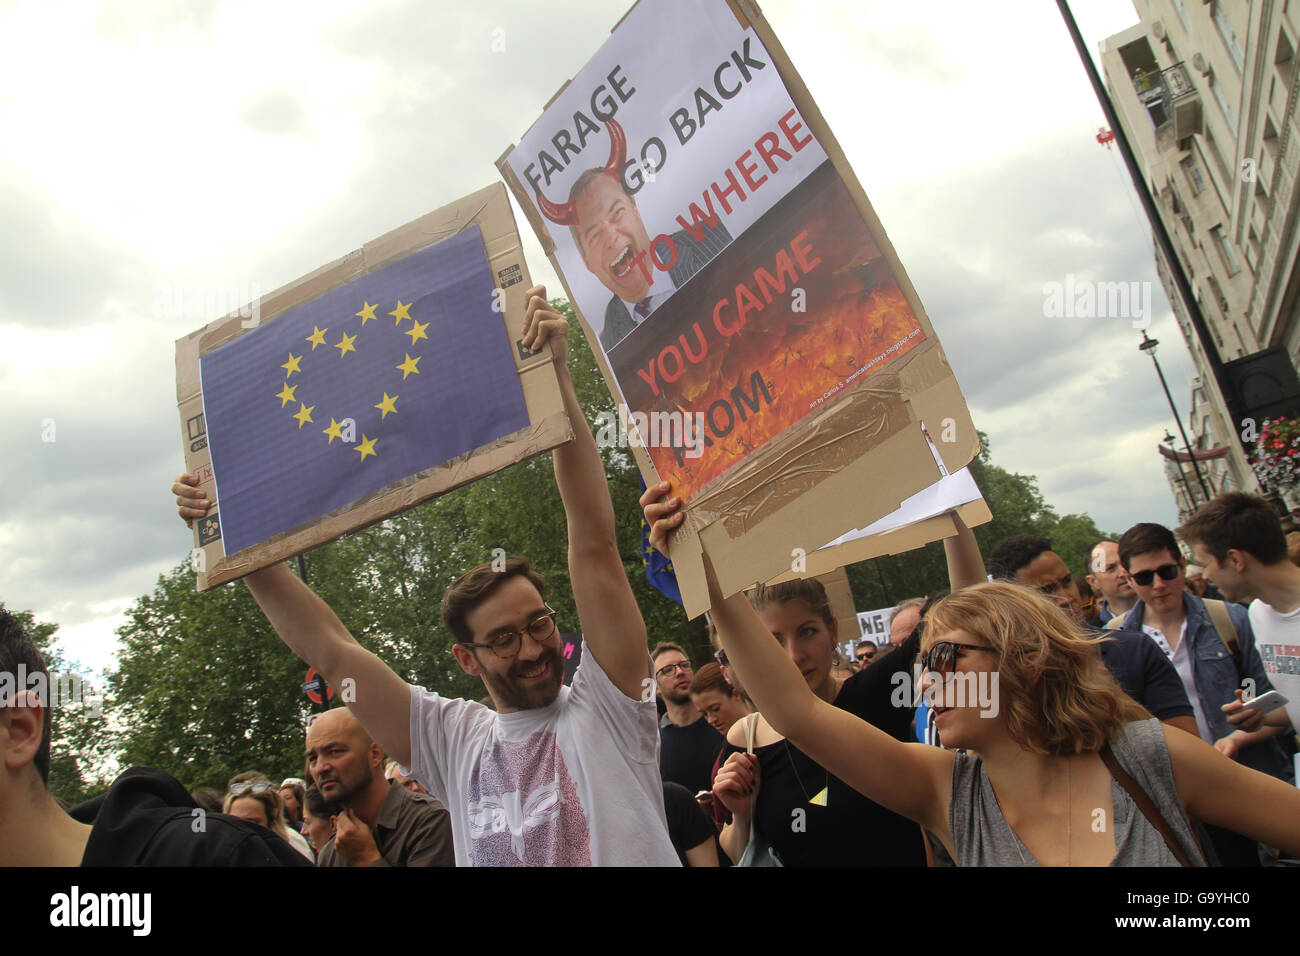 London, UK. 02nd July, 2016. LONDON, UK - JULY 2: A pro EU supporters hold up a placards during the March For Europe demonstration a week after the Brexit Referendum vote. The pro EU supporters march on 2 July 2016, was from Hyde Park to parliament Square. Photo: David Mbiyu/ Alamy New Live Stock Photo